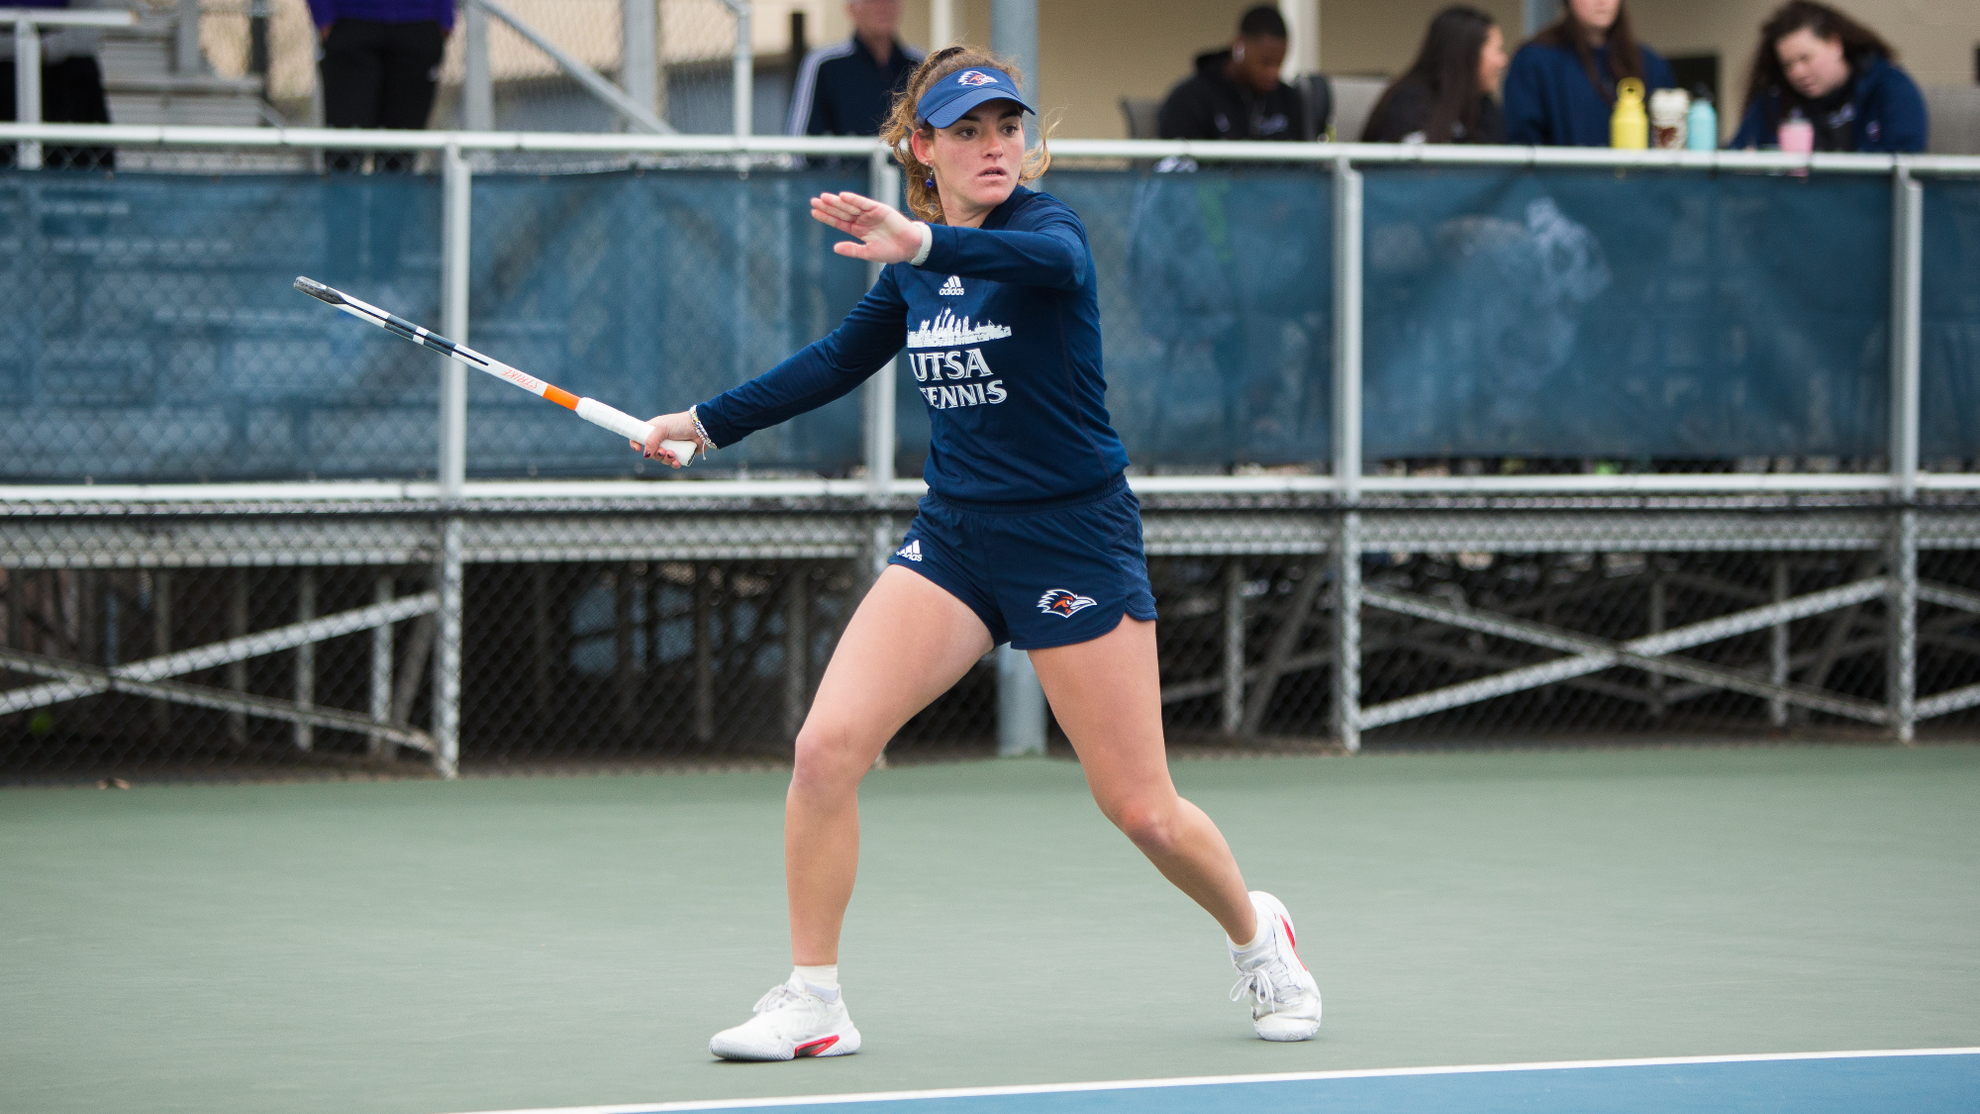 Windy weather forces cancellation of women's tennis match - UTSA Athletics  - Official Athletics Website